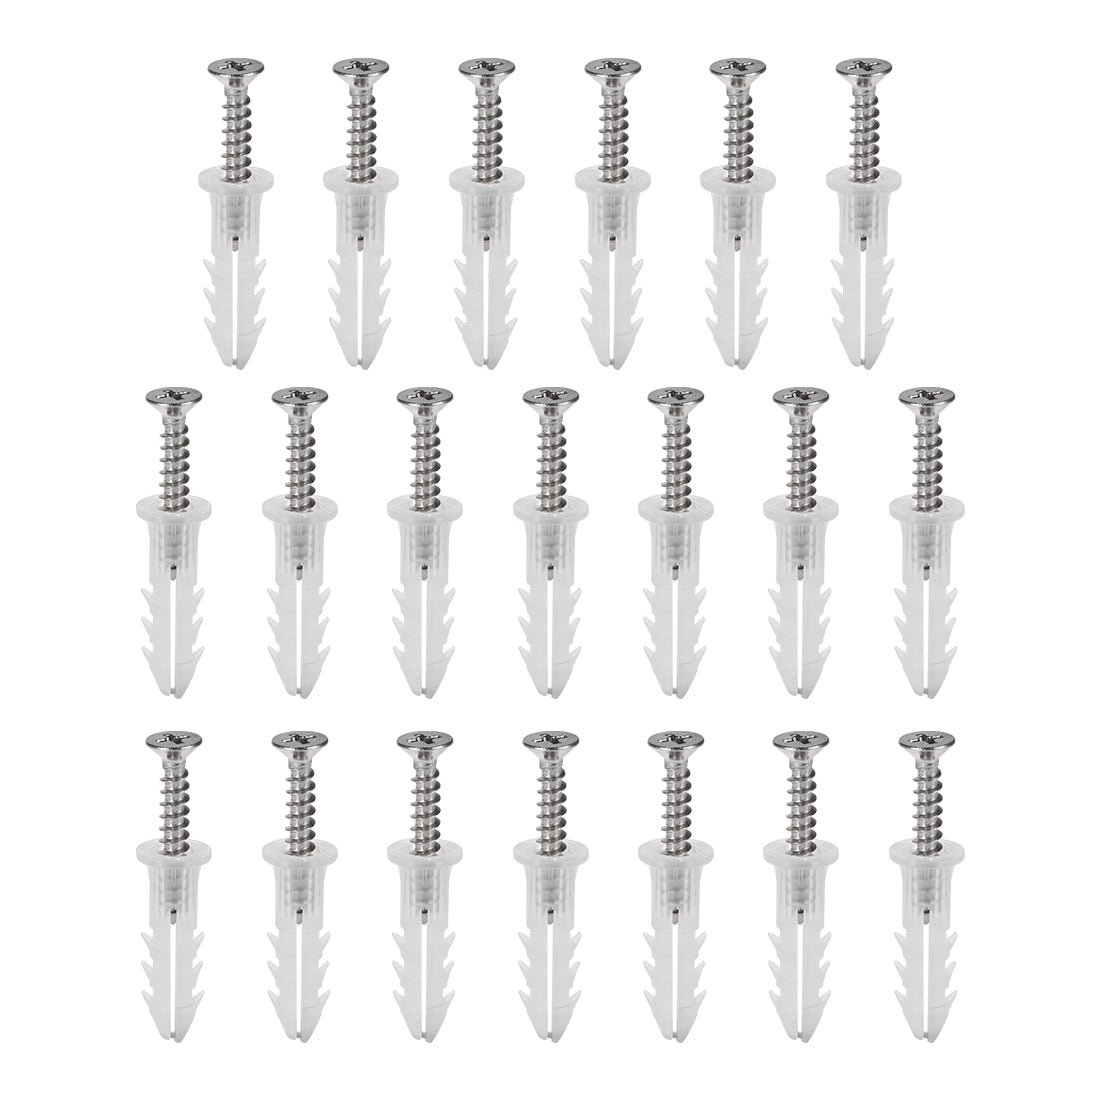 uxcell Uxcell 6x26mm Plastic Expansion Tube for Drywall with Screws, Translucent 20pcs